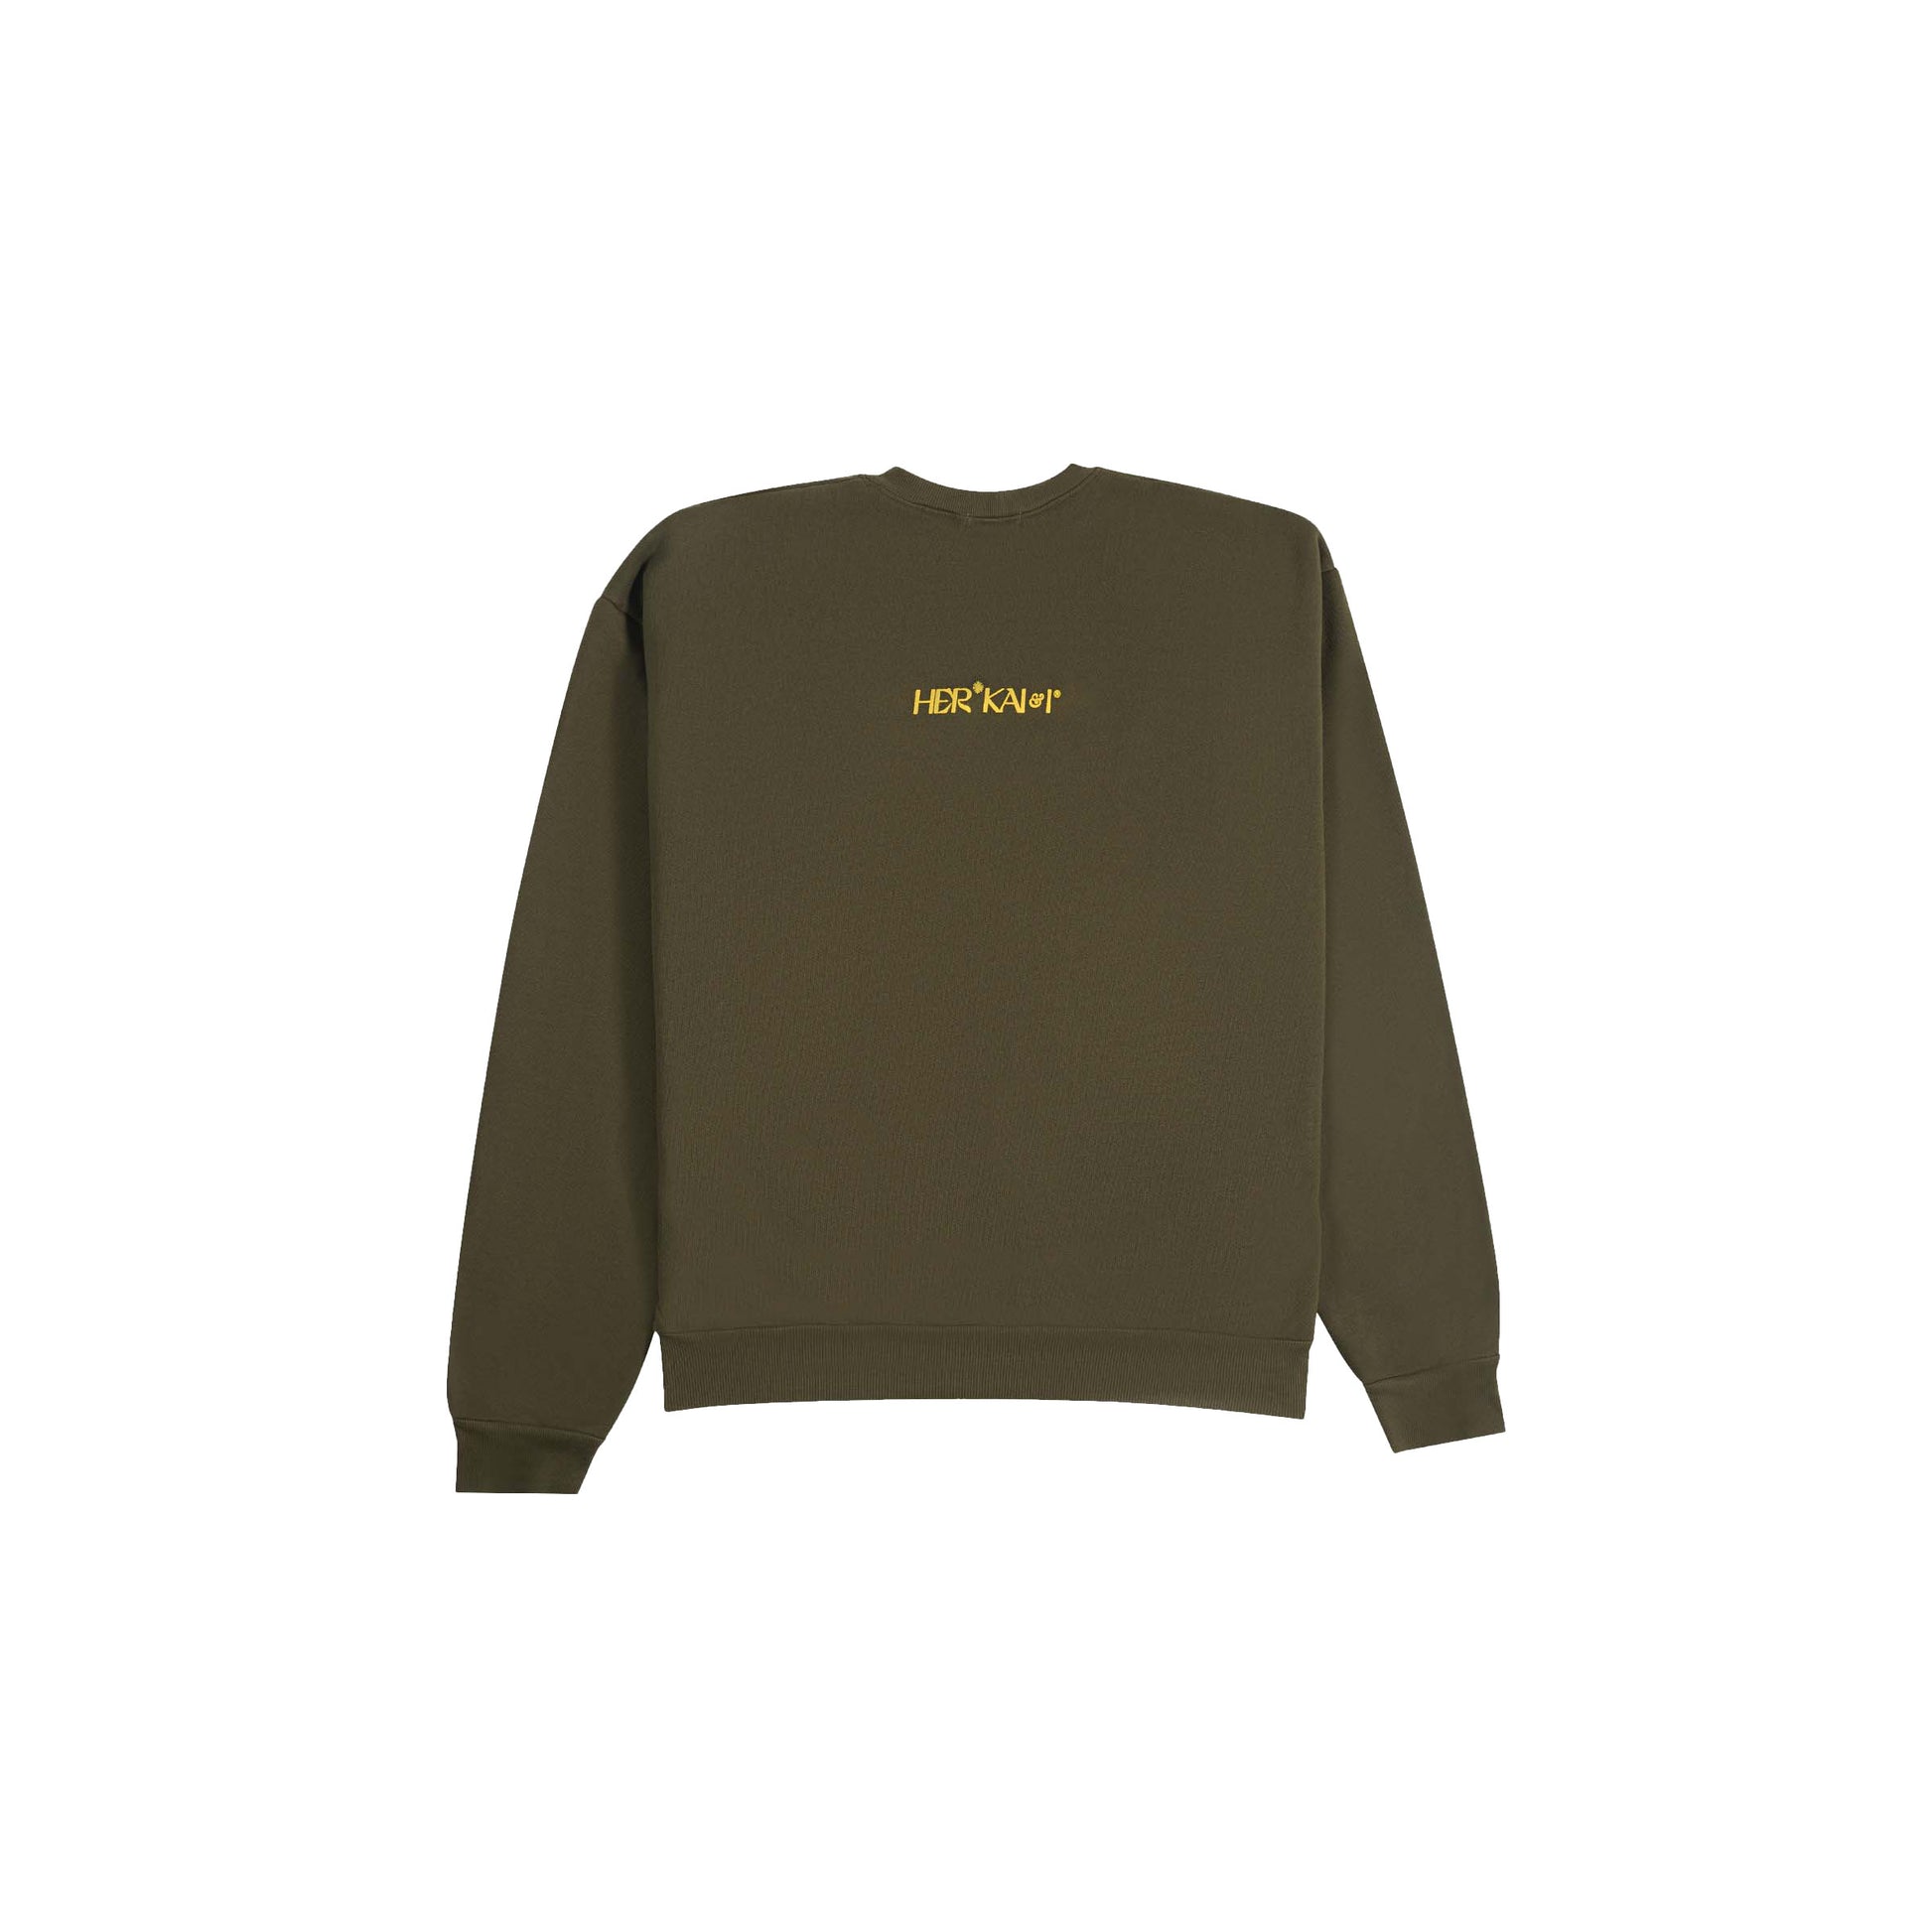 BACK VIEW OF UNIVERSAL PURSUIT CREWNECK IN KHAKI GREEN BY HER KAI & I